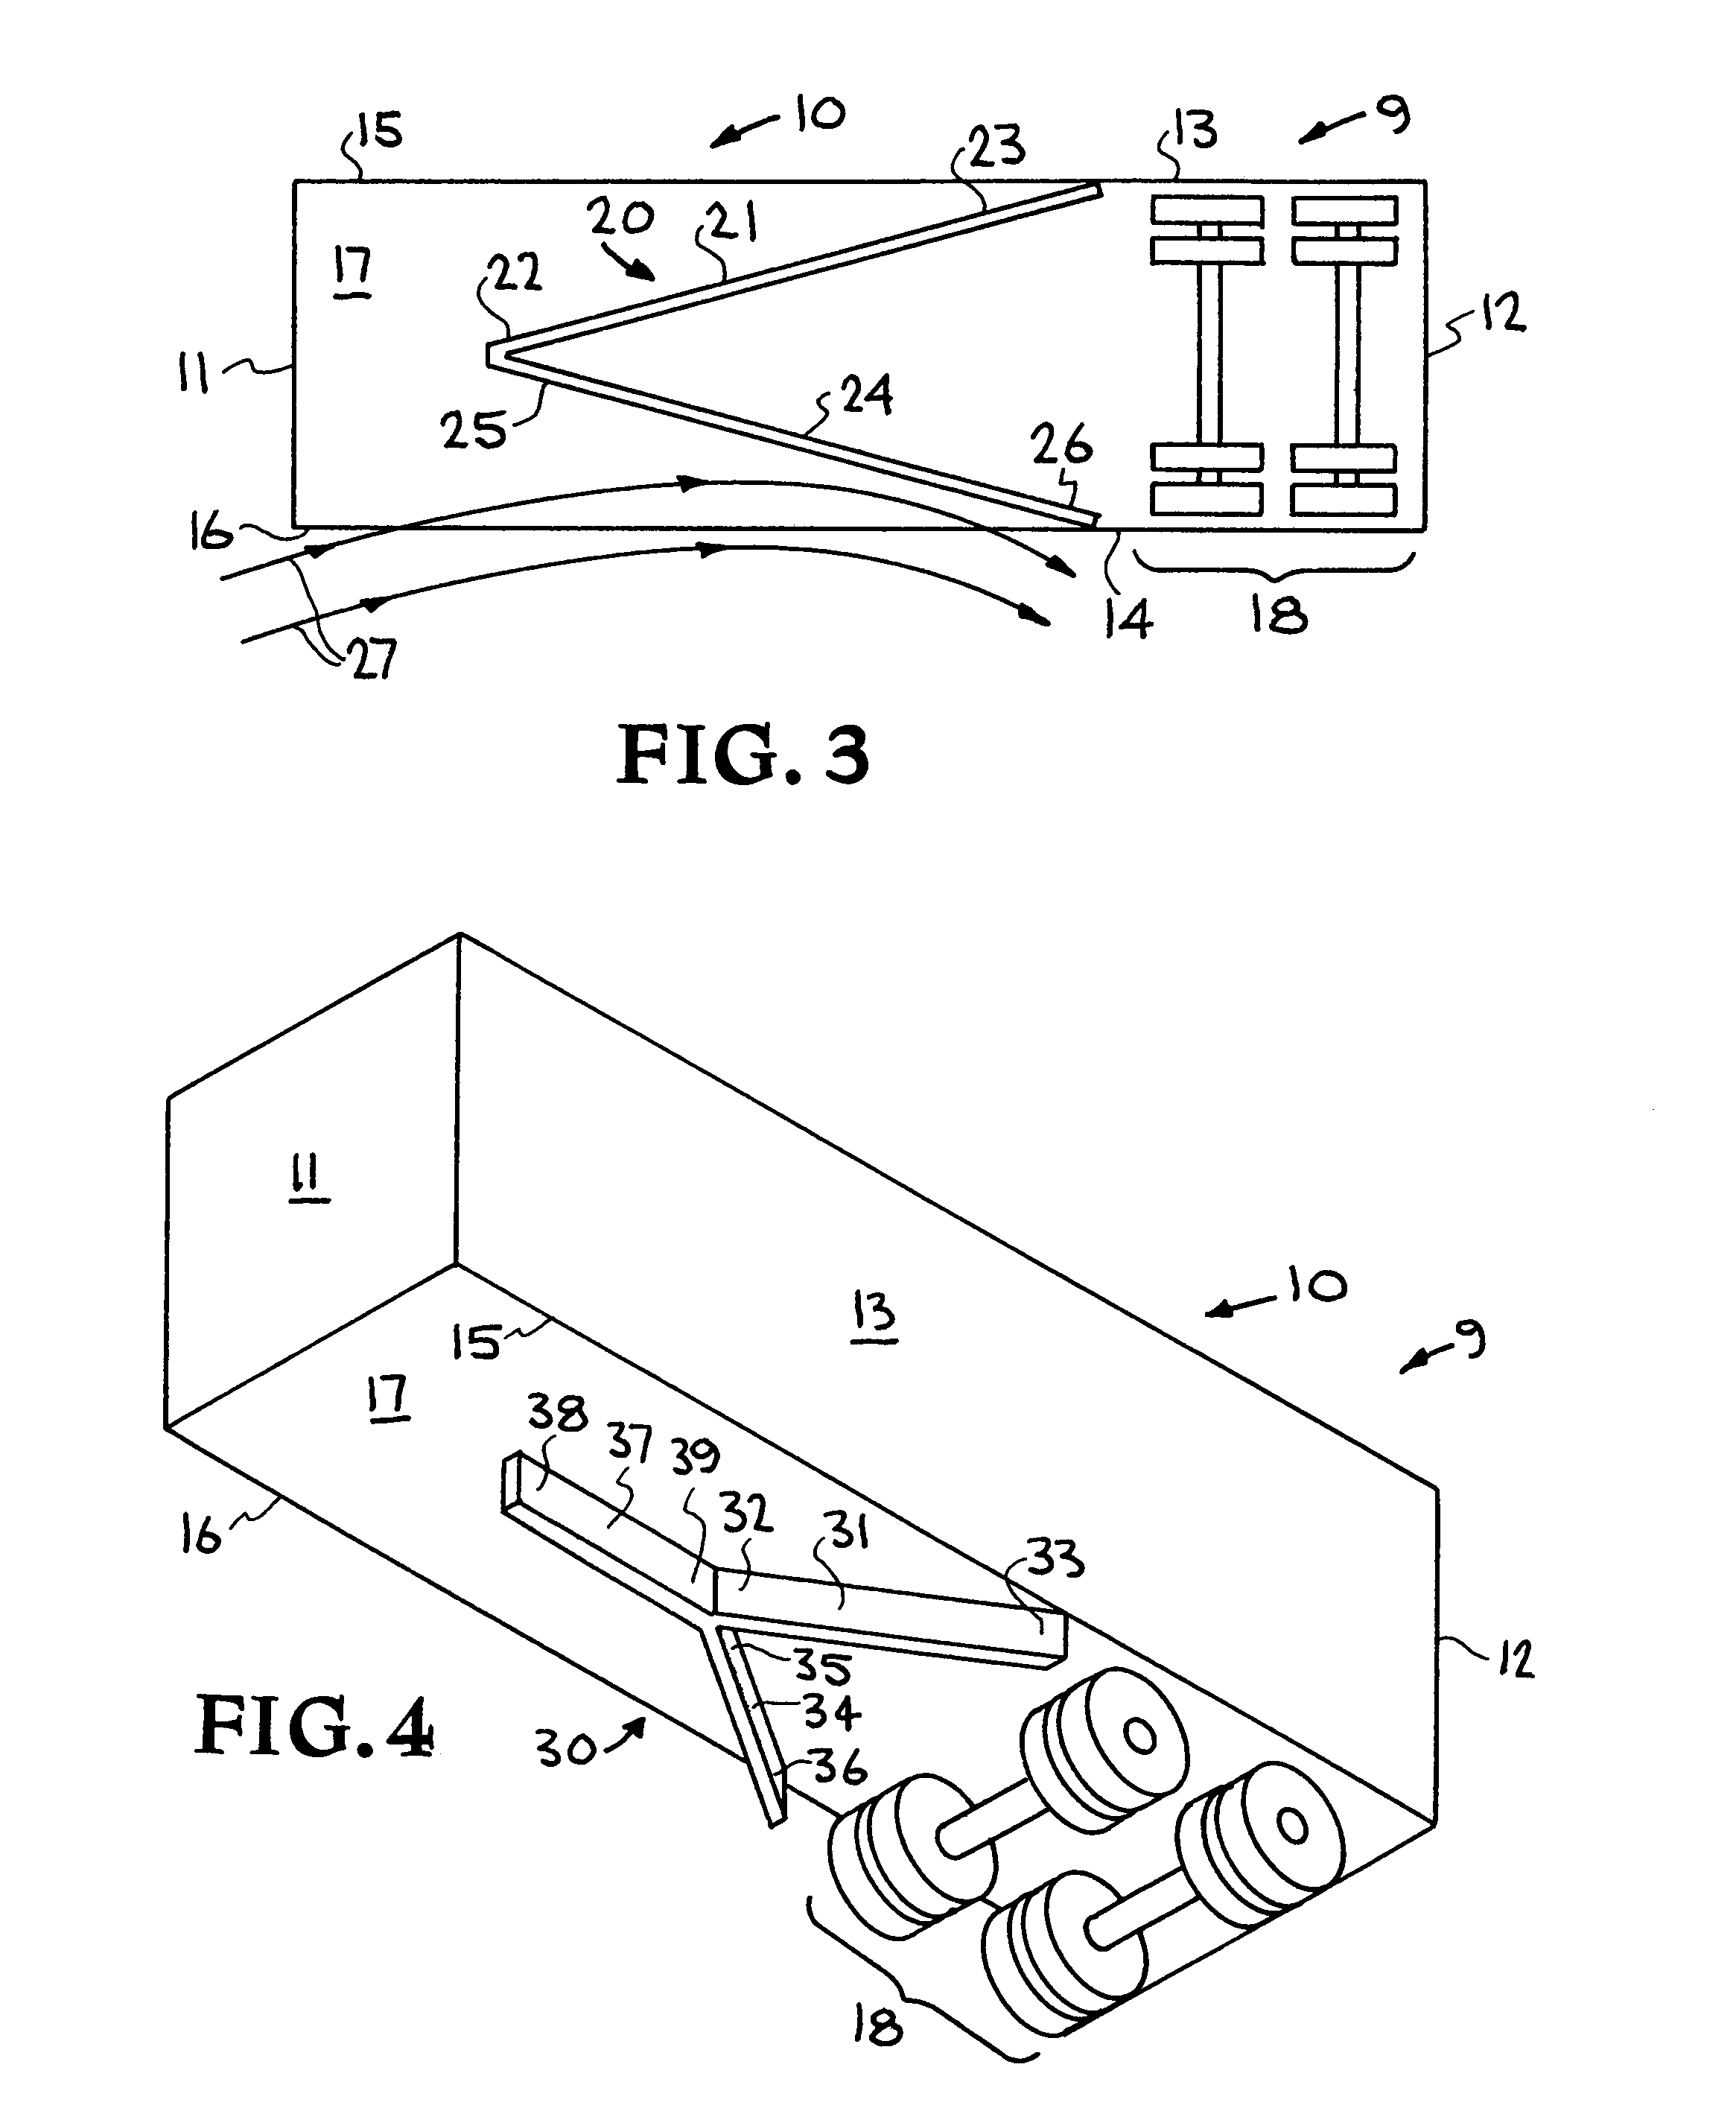 Aerodynamic drag reduction apparatus for wheeled vehicles in ground effect